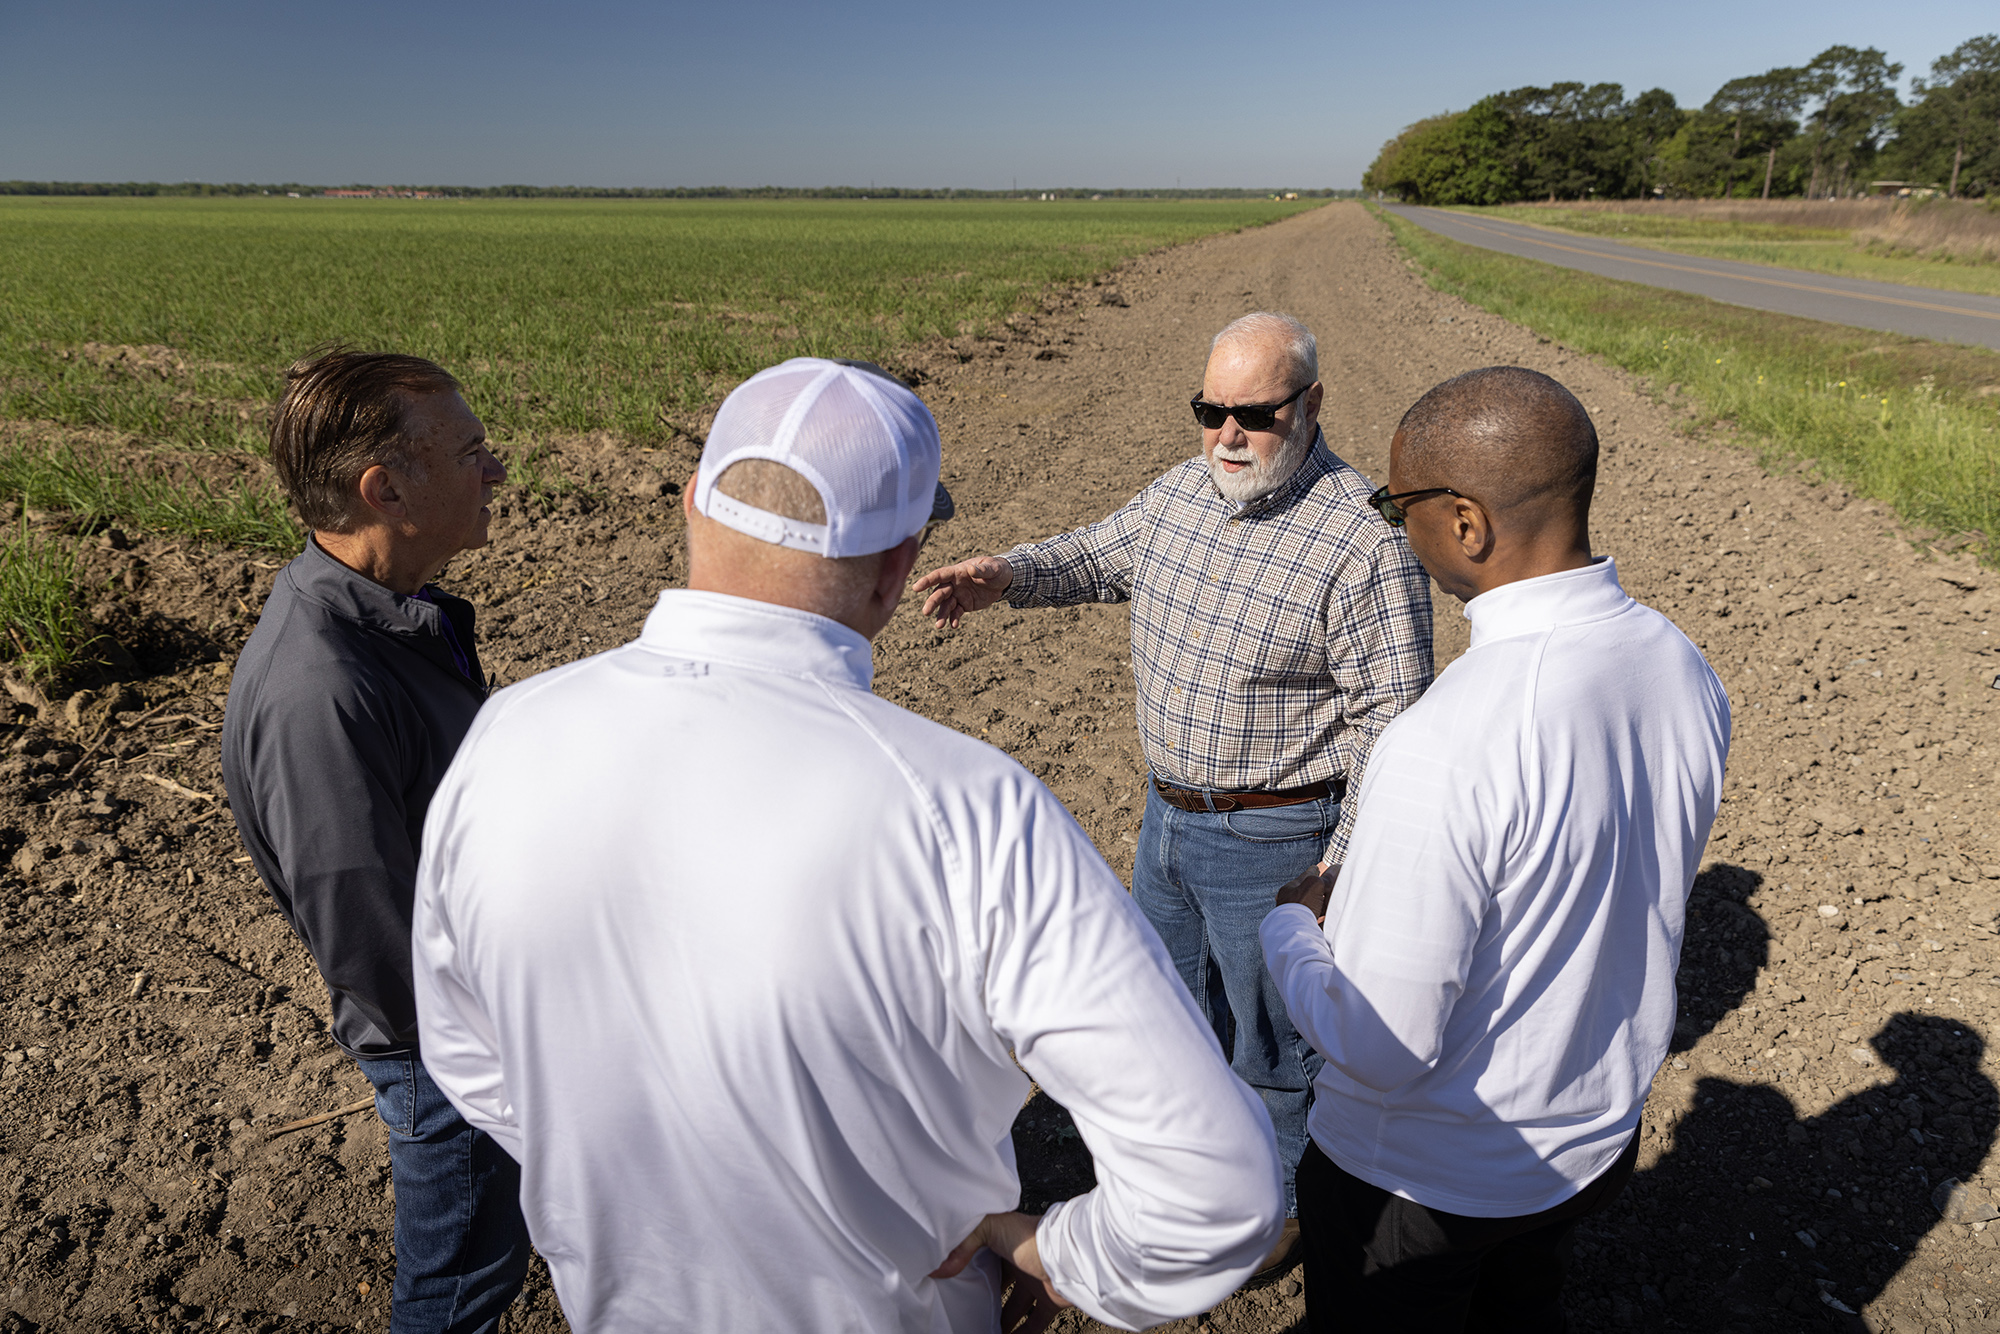 President Tate and others standing next to a sugarcane field